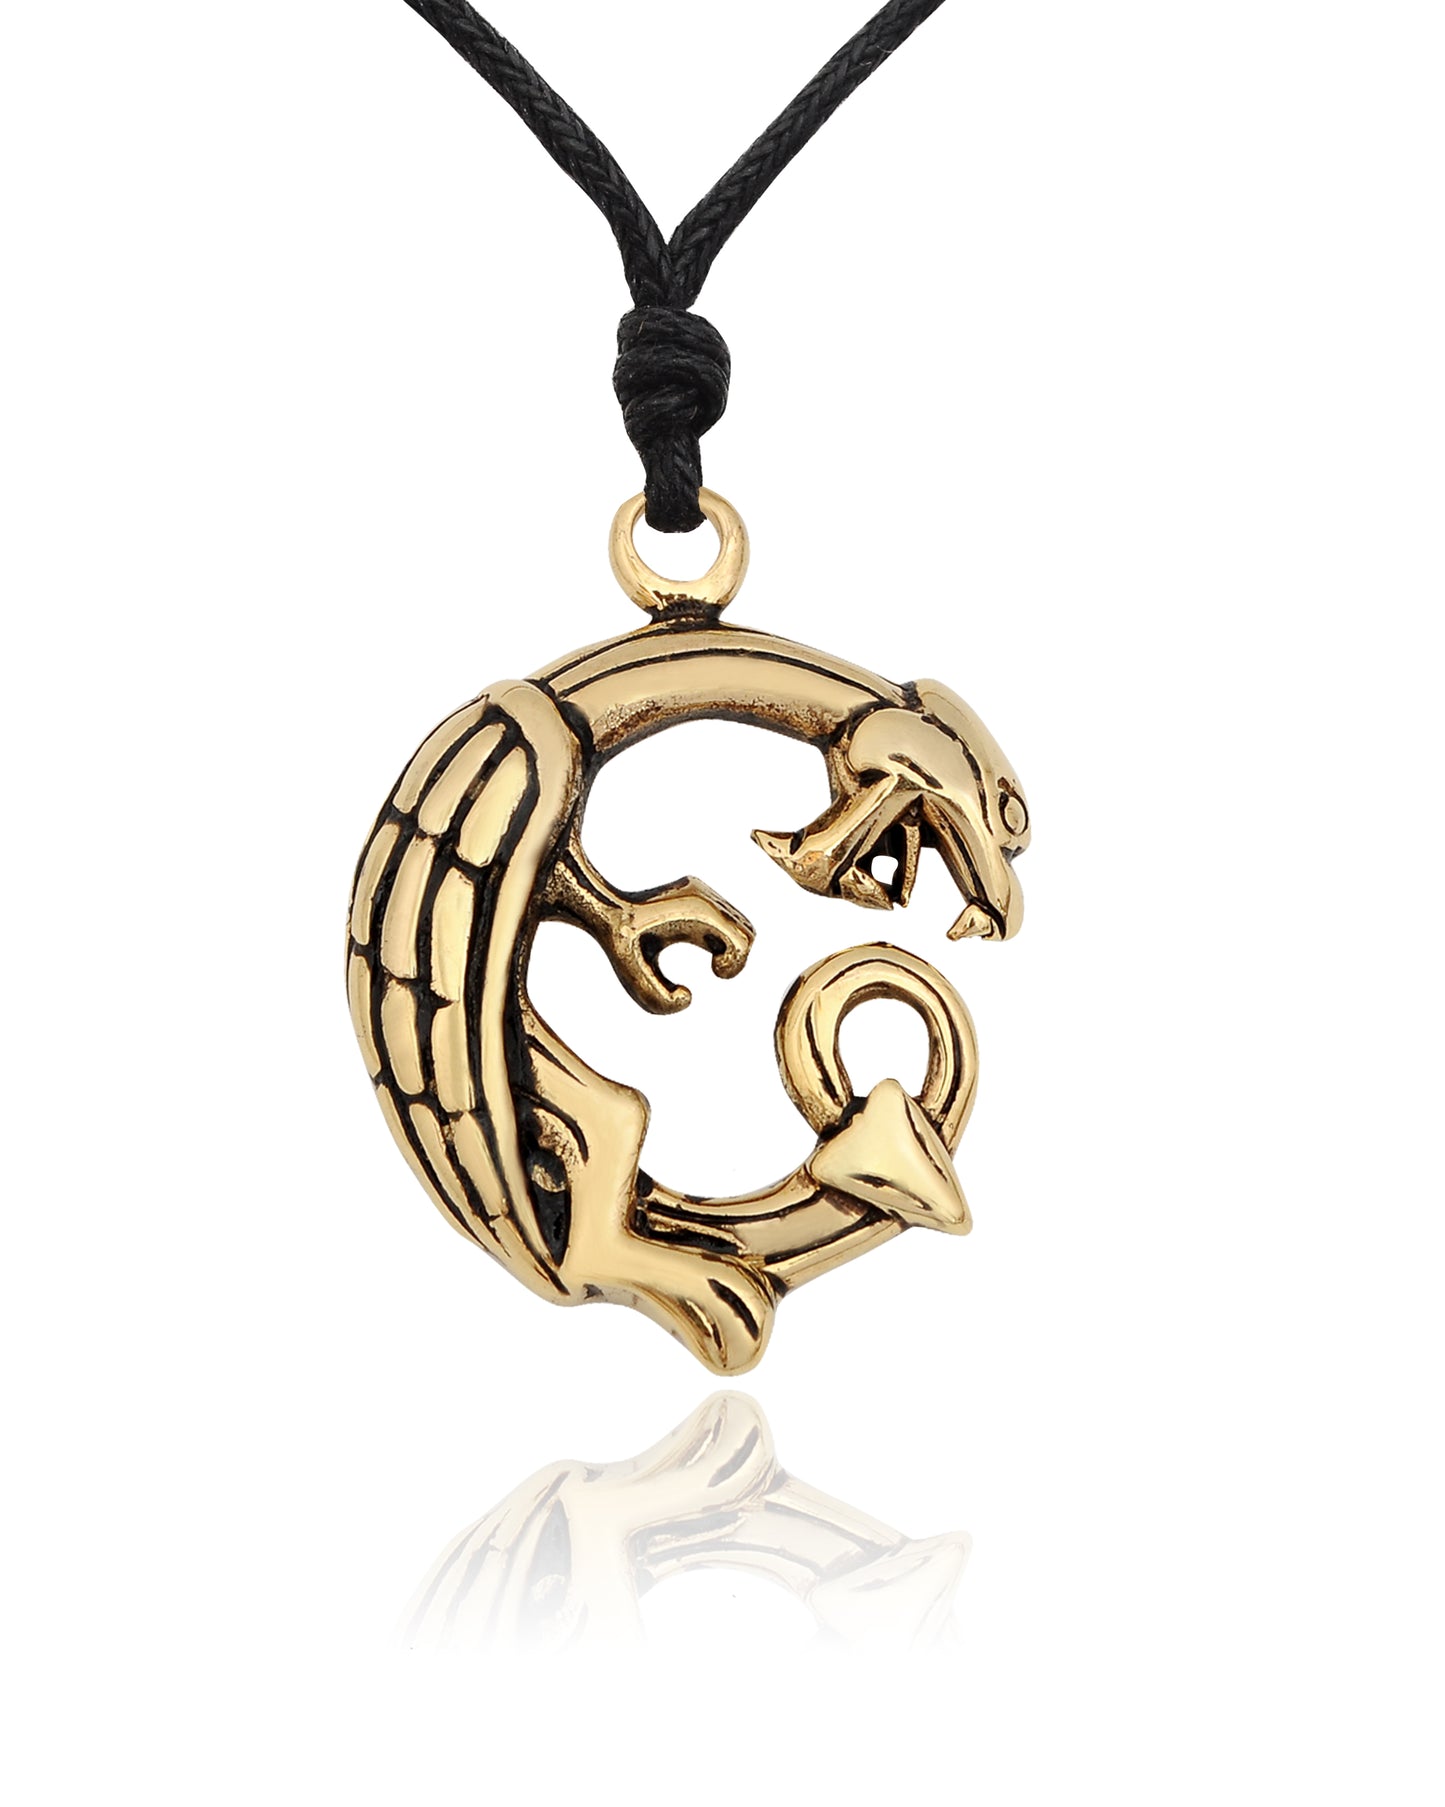 Flawless Dragon Ouroboros Handmade Brass Charm Necklace Pendant Jewelry With Cotton Cord